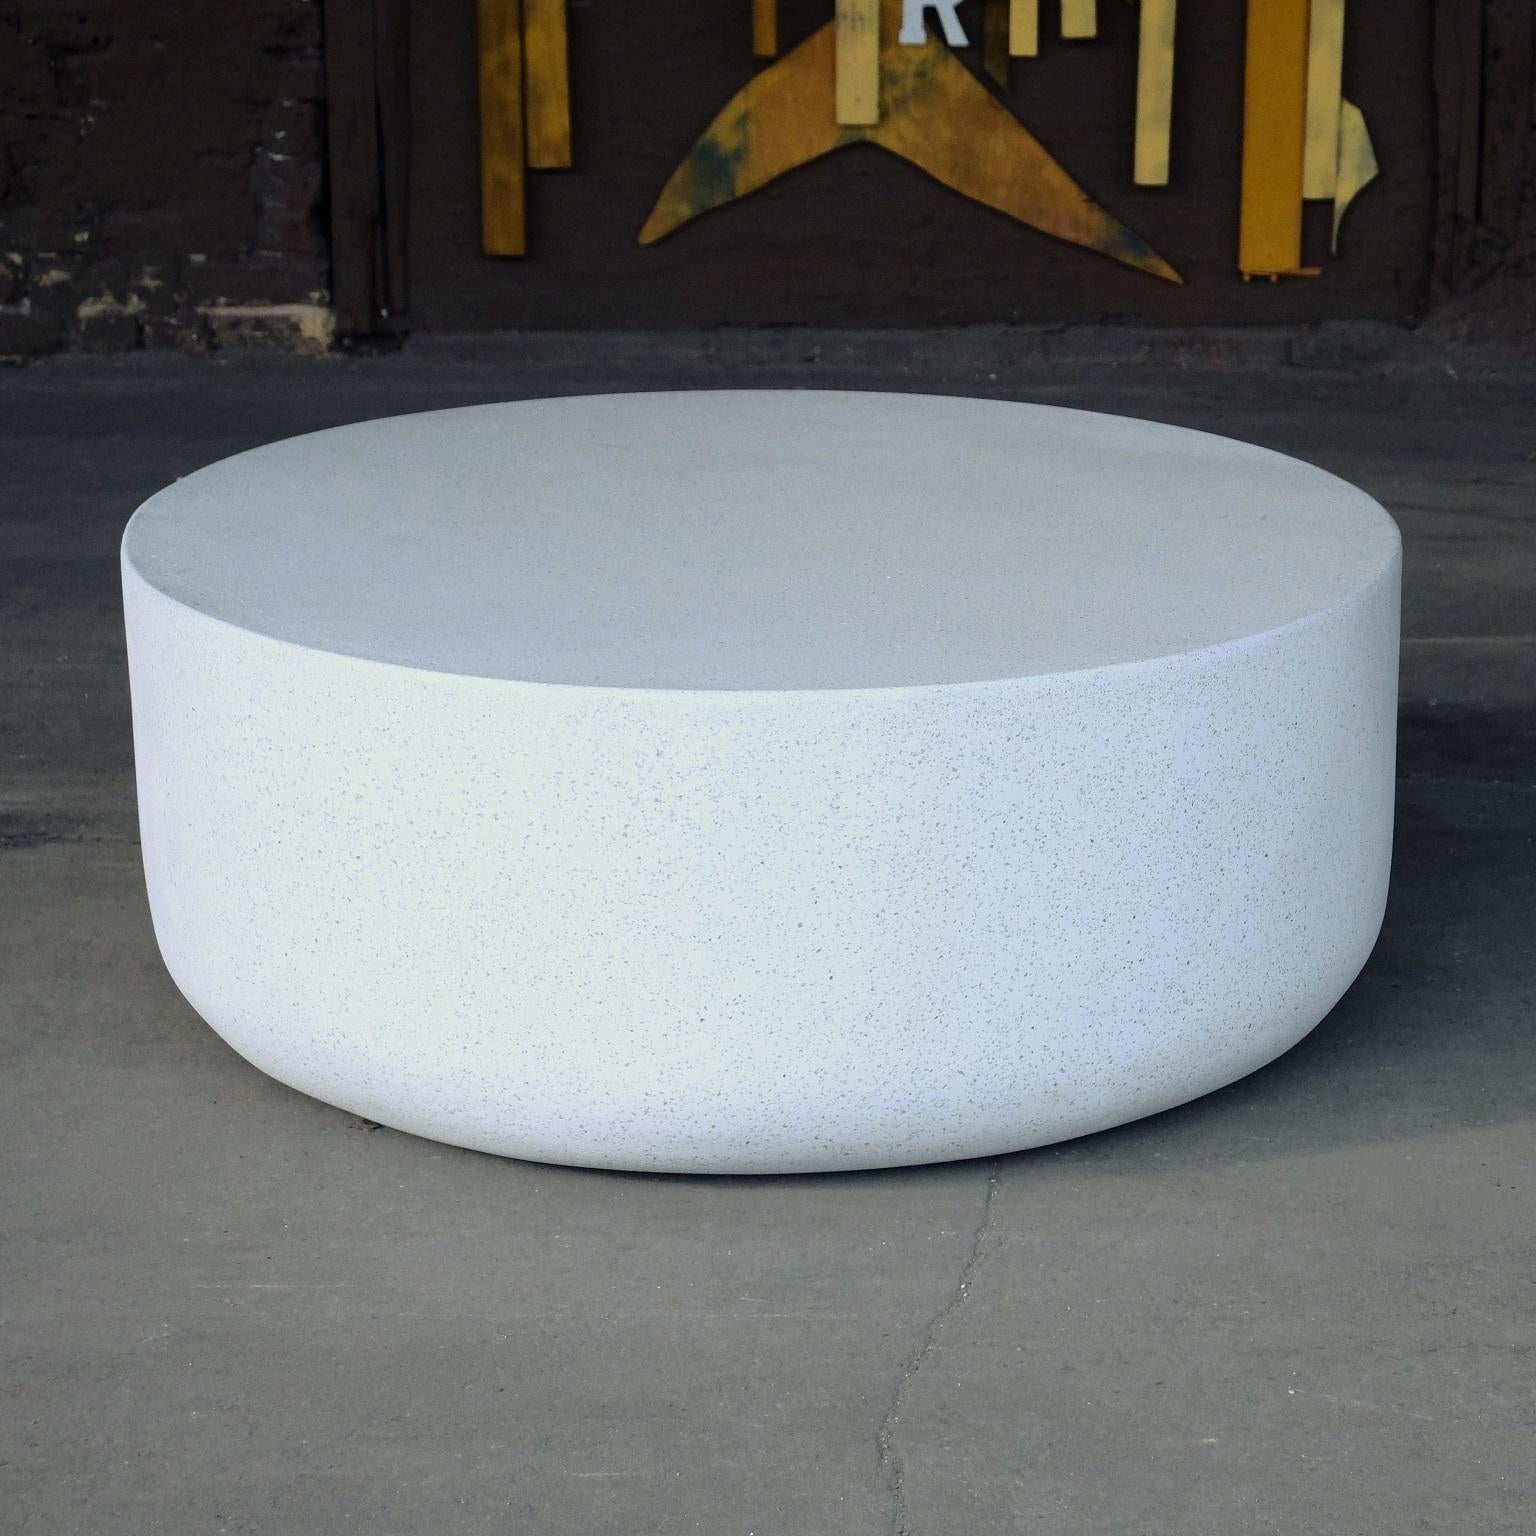 An anchor to the organic world. A rounded base draws the eye downward to earth, keeping you grounded. 

Dimensions: Diameter 36 in. (91 cm), height 14 in. (35.5 cm). Weight 40 lbs. (18 kg) No assembly required.

Finish color options:
White